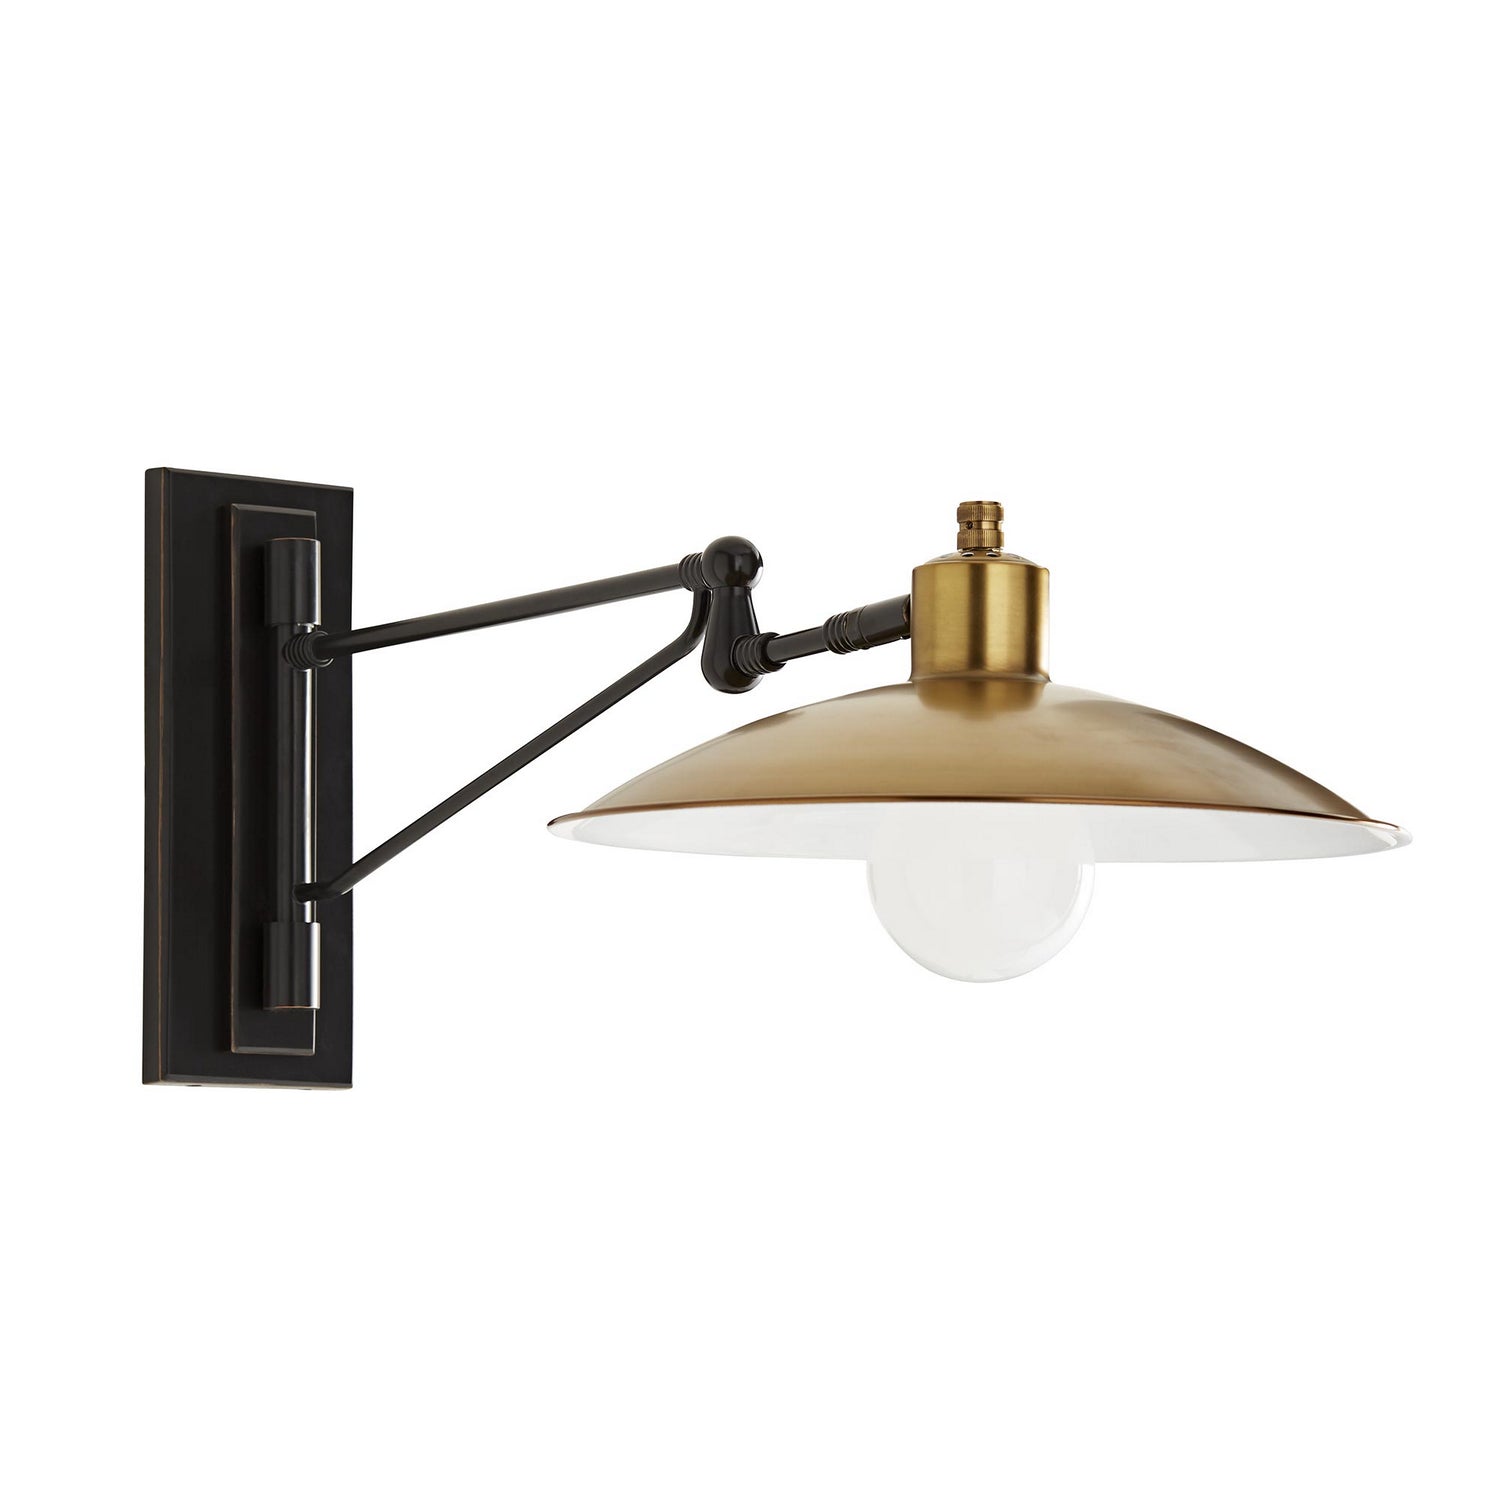 One Light Wall Sconce from the Nox collection in Antique Brass finish